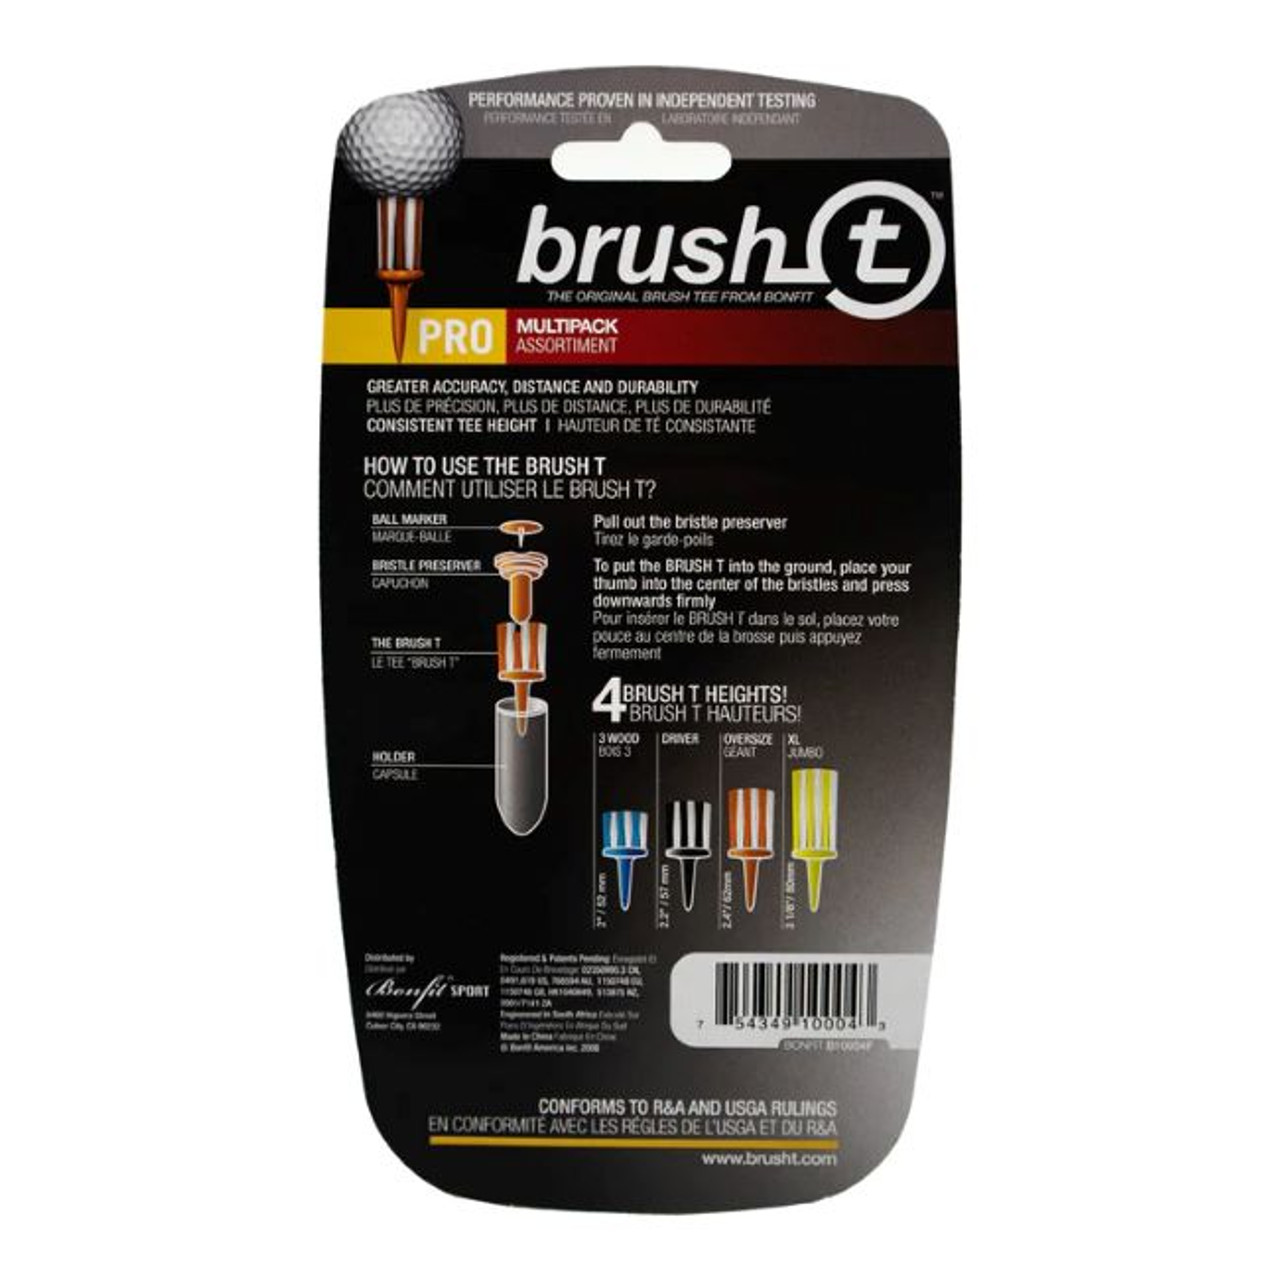 Brush-T by Bonfit  Less Friction For Farther Drives – brush-T